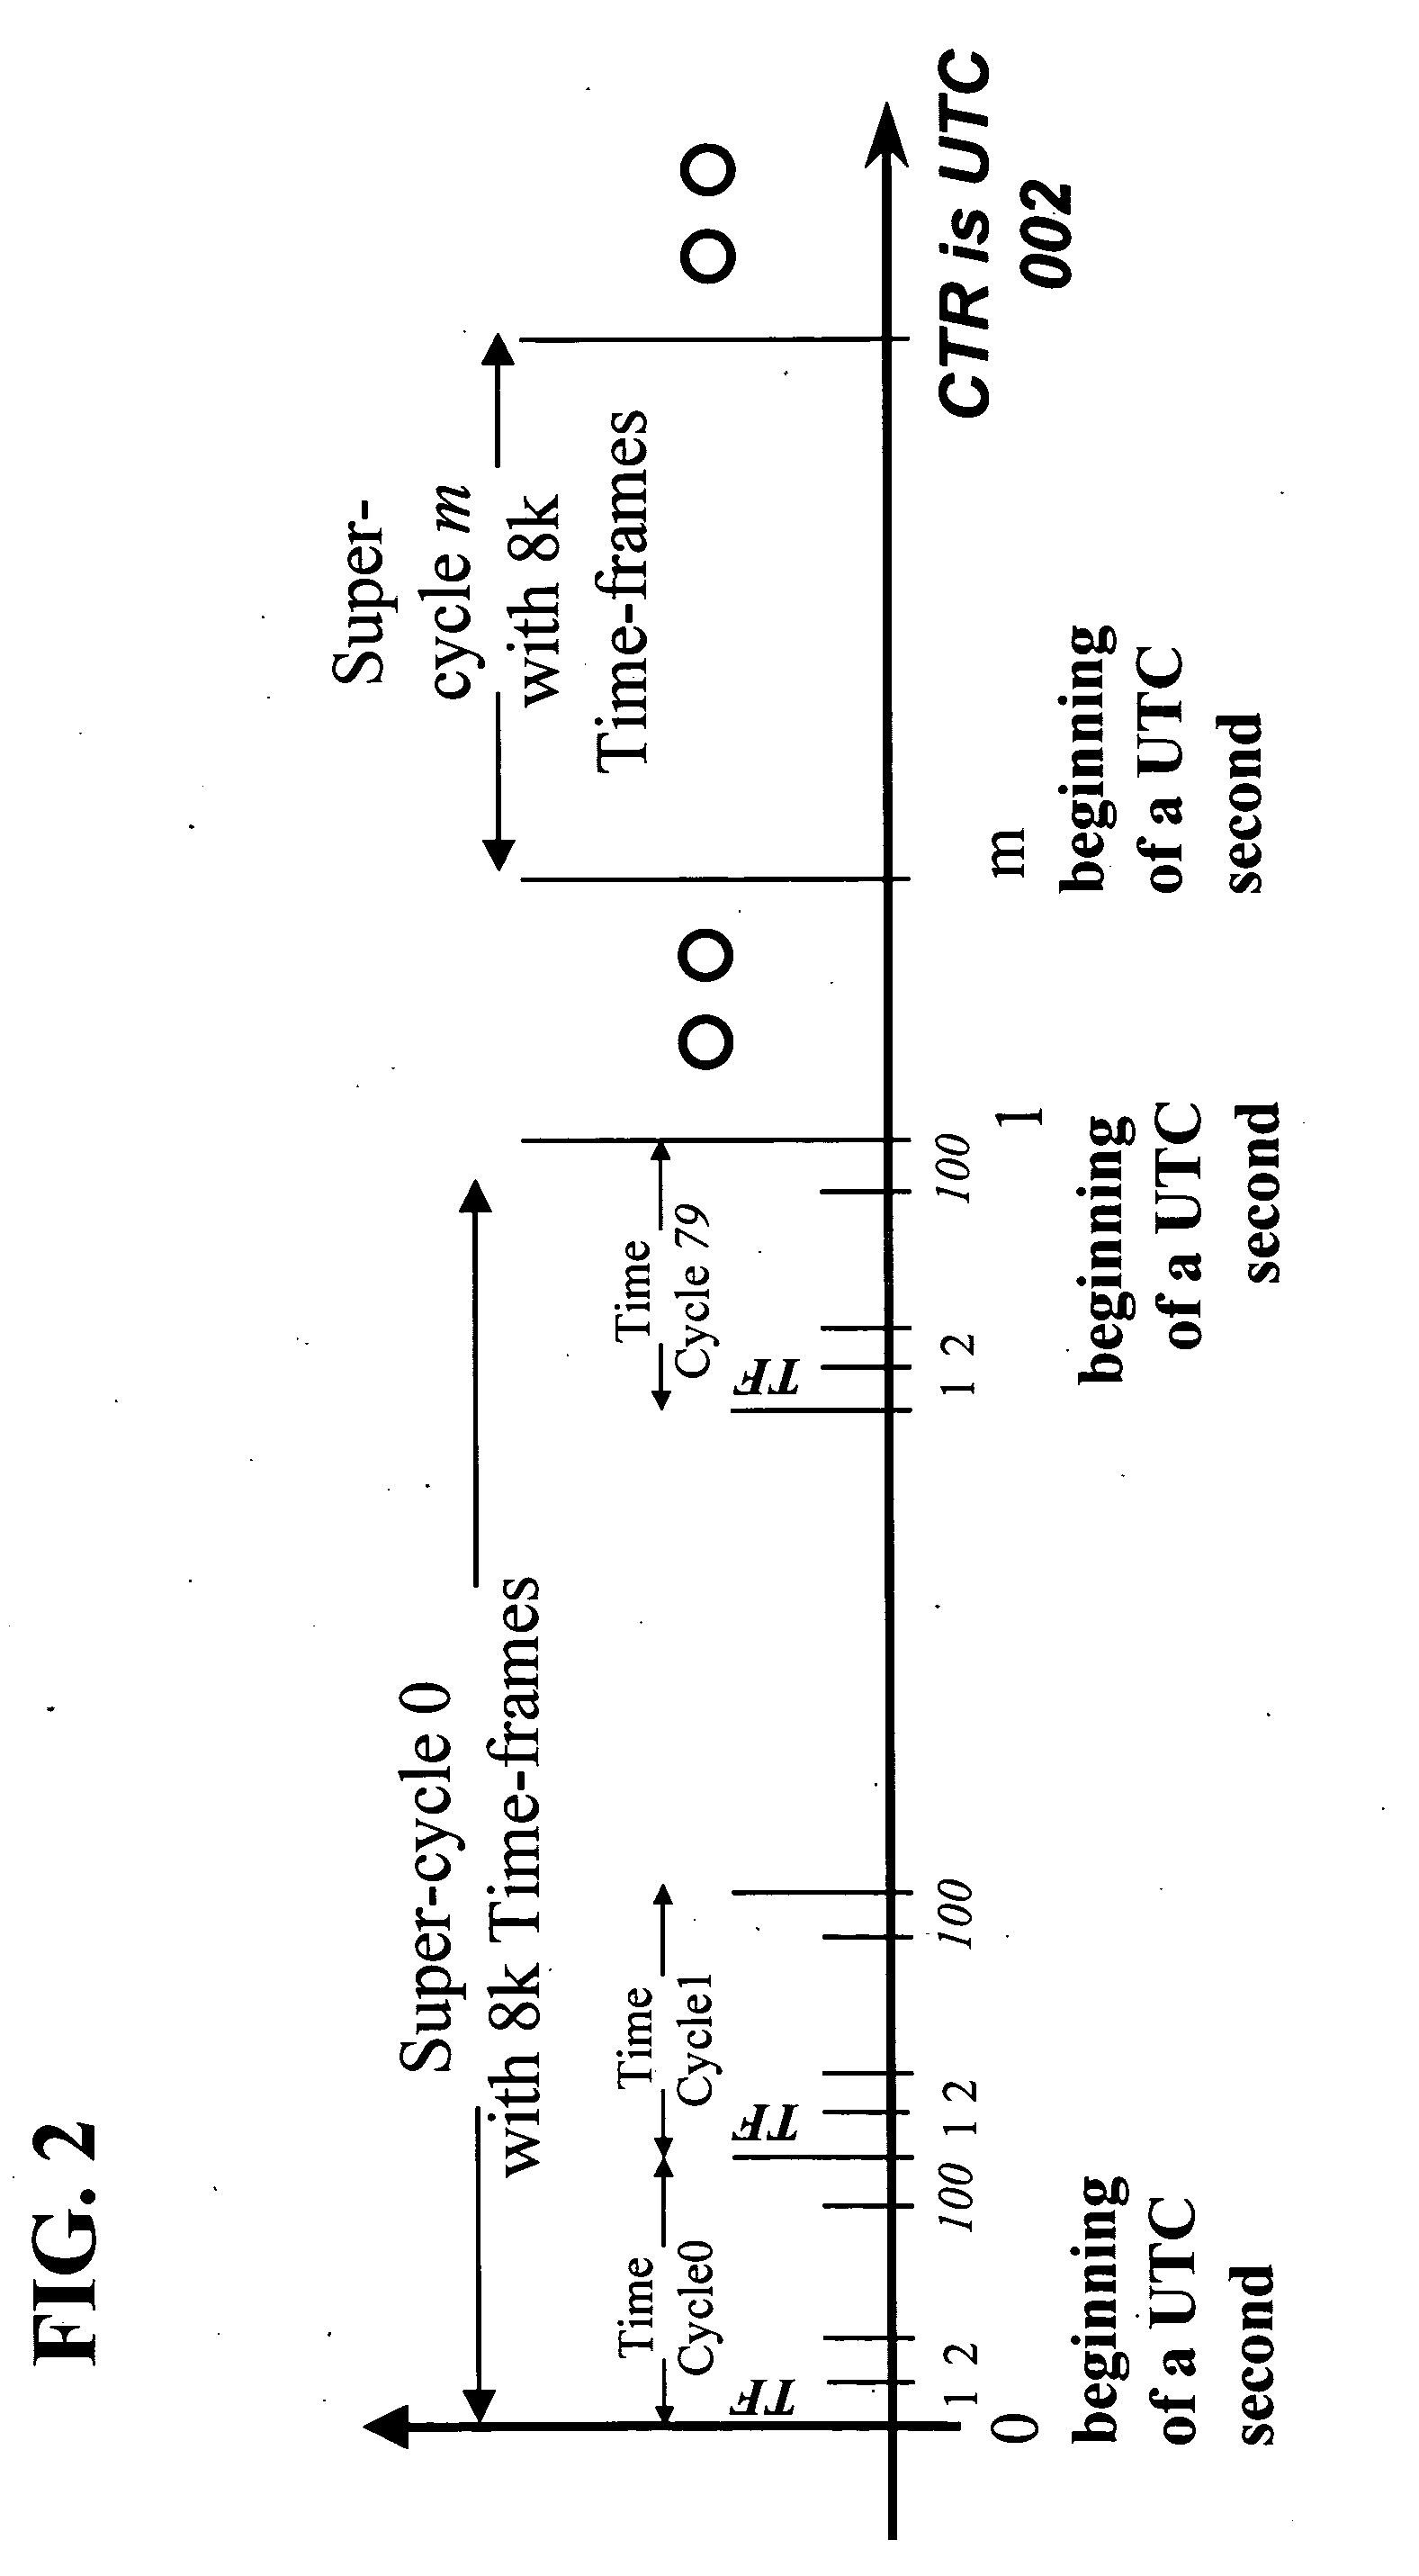 Interface system and methodology having scheduled connection responsive to common time reference